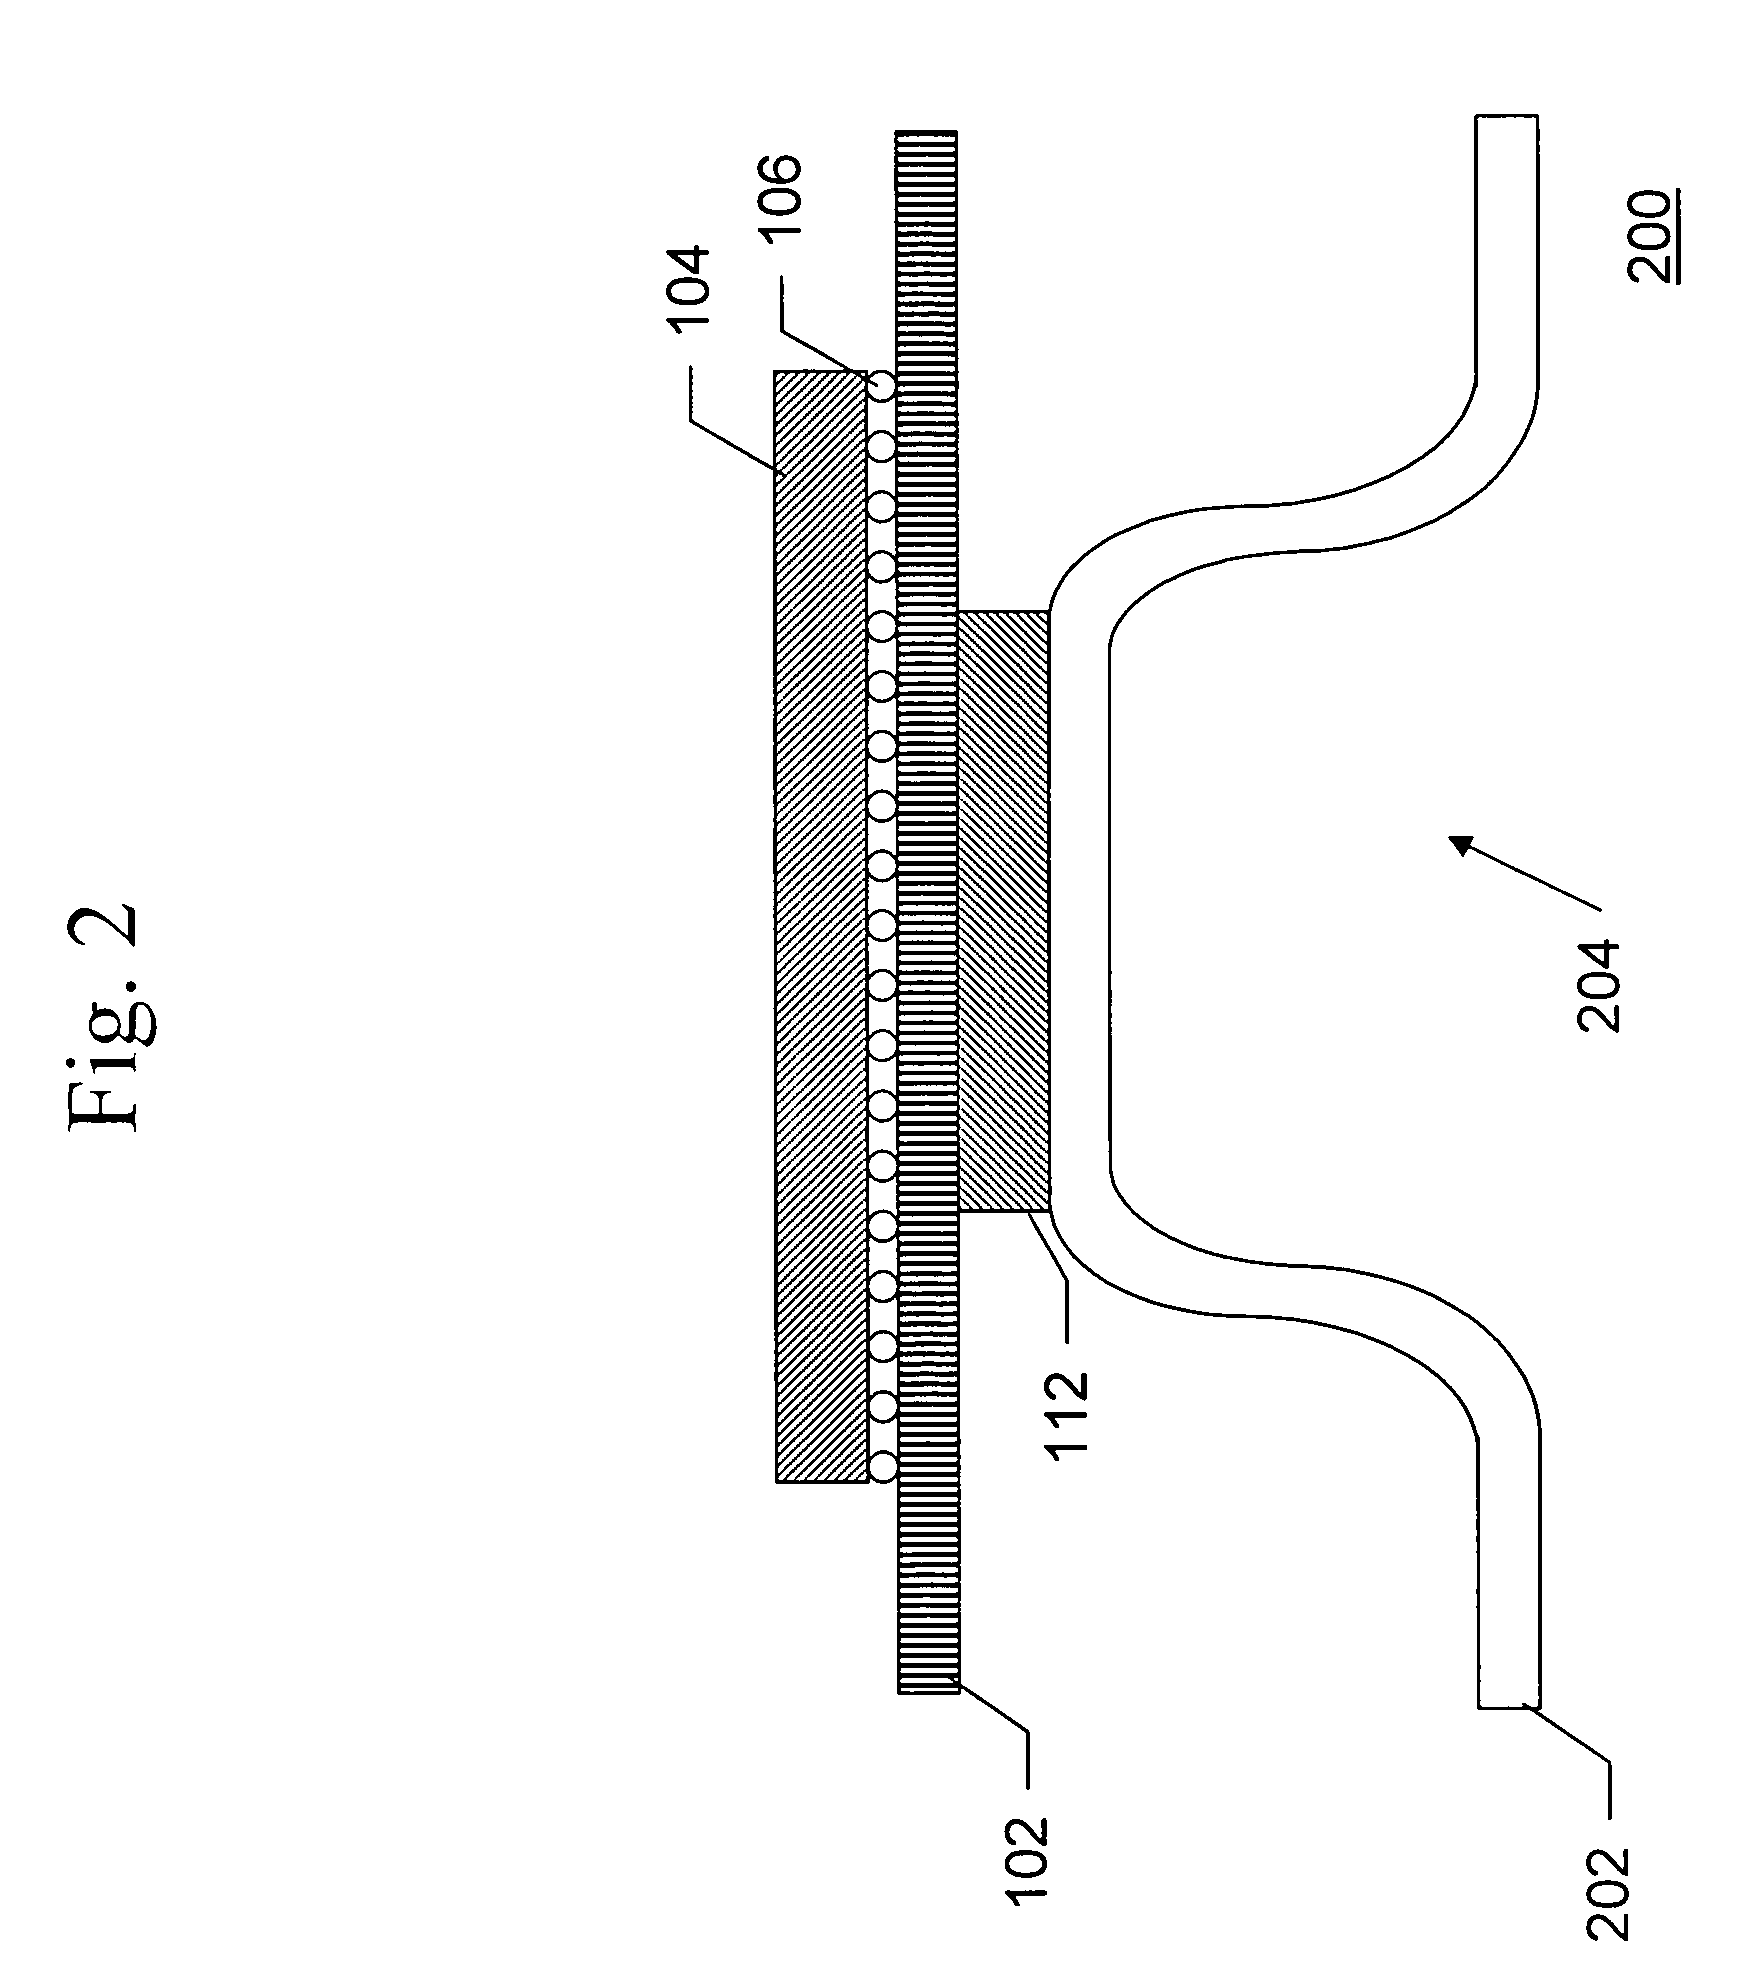 Conductive heat transfer for electrical devices from the solder side and component side of a circuit card assembly